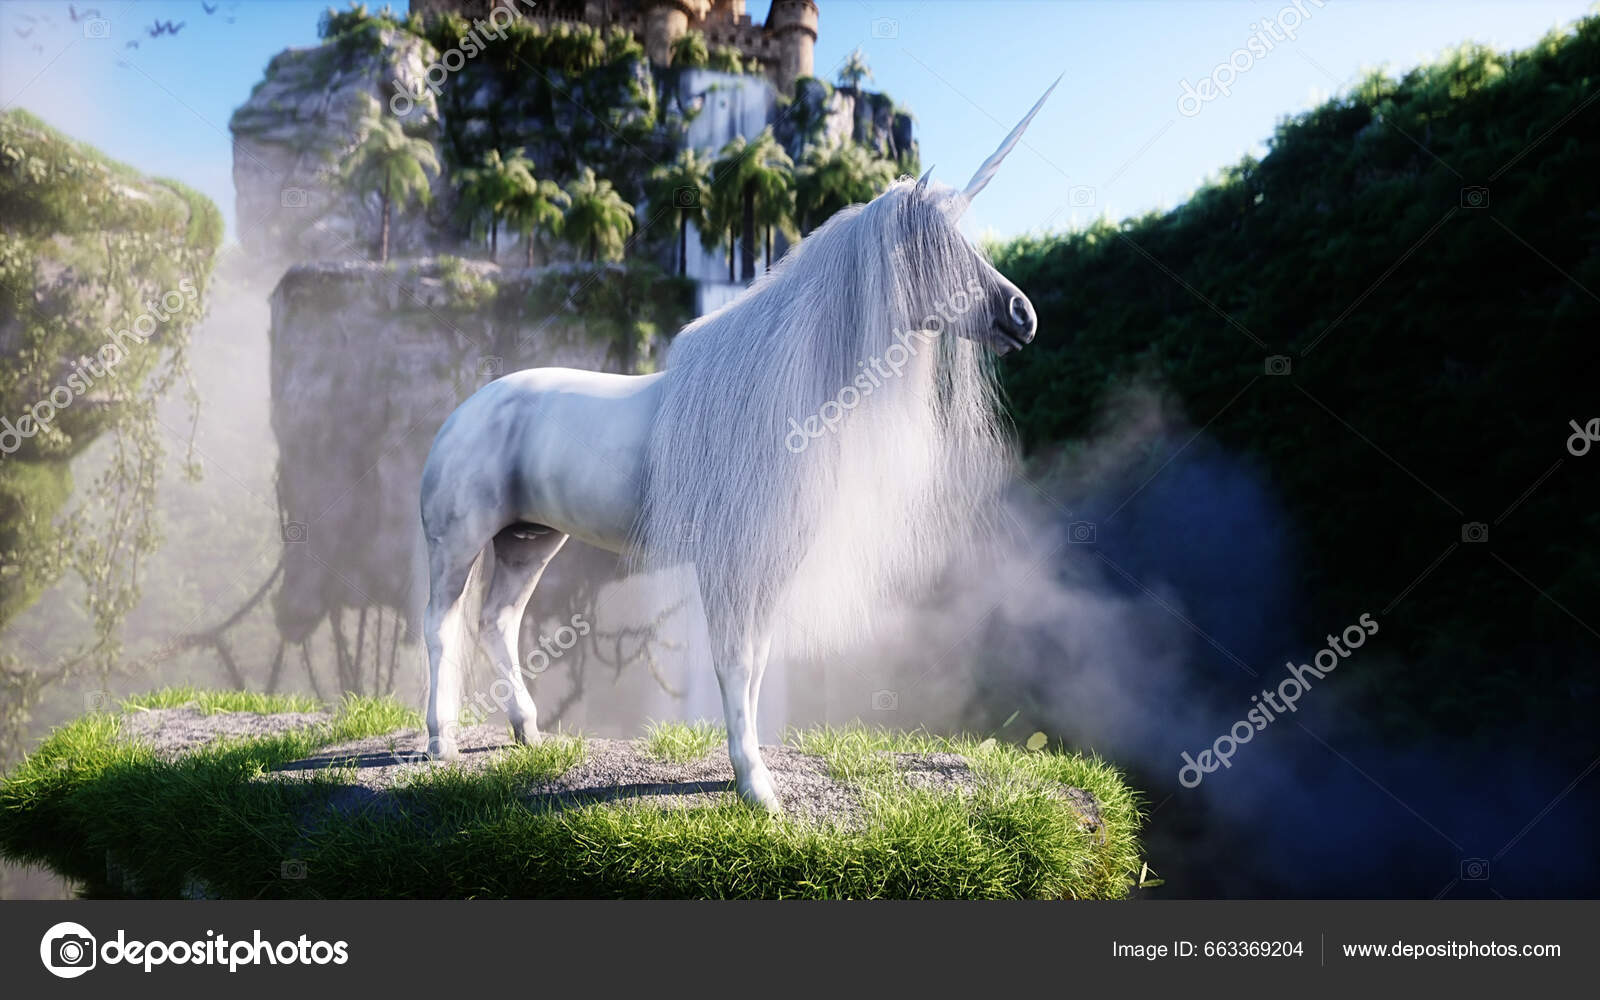 Download Unicorn, Nature, Fairytale. Royalty-Free Vector Graphic